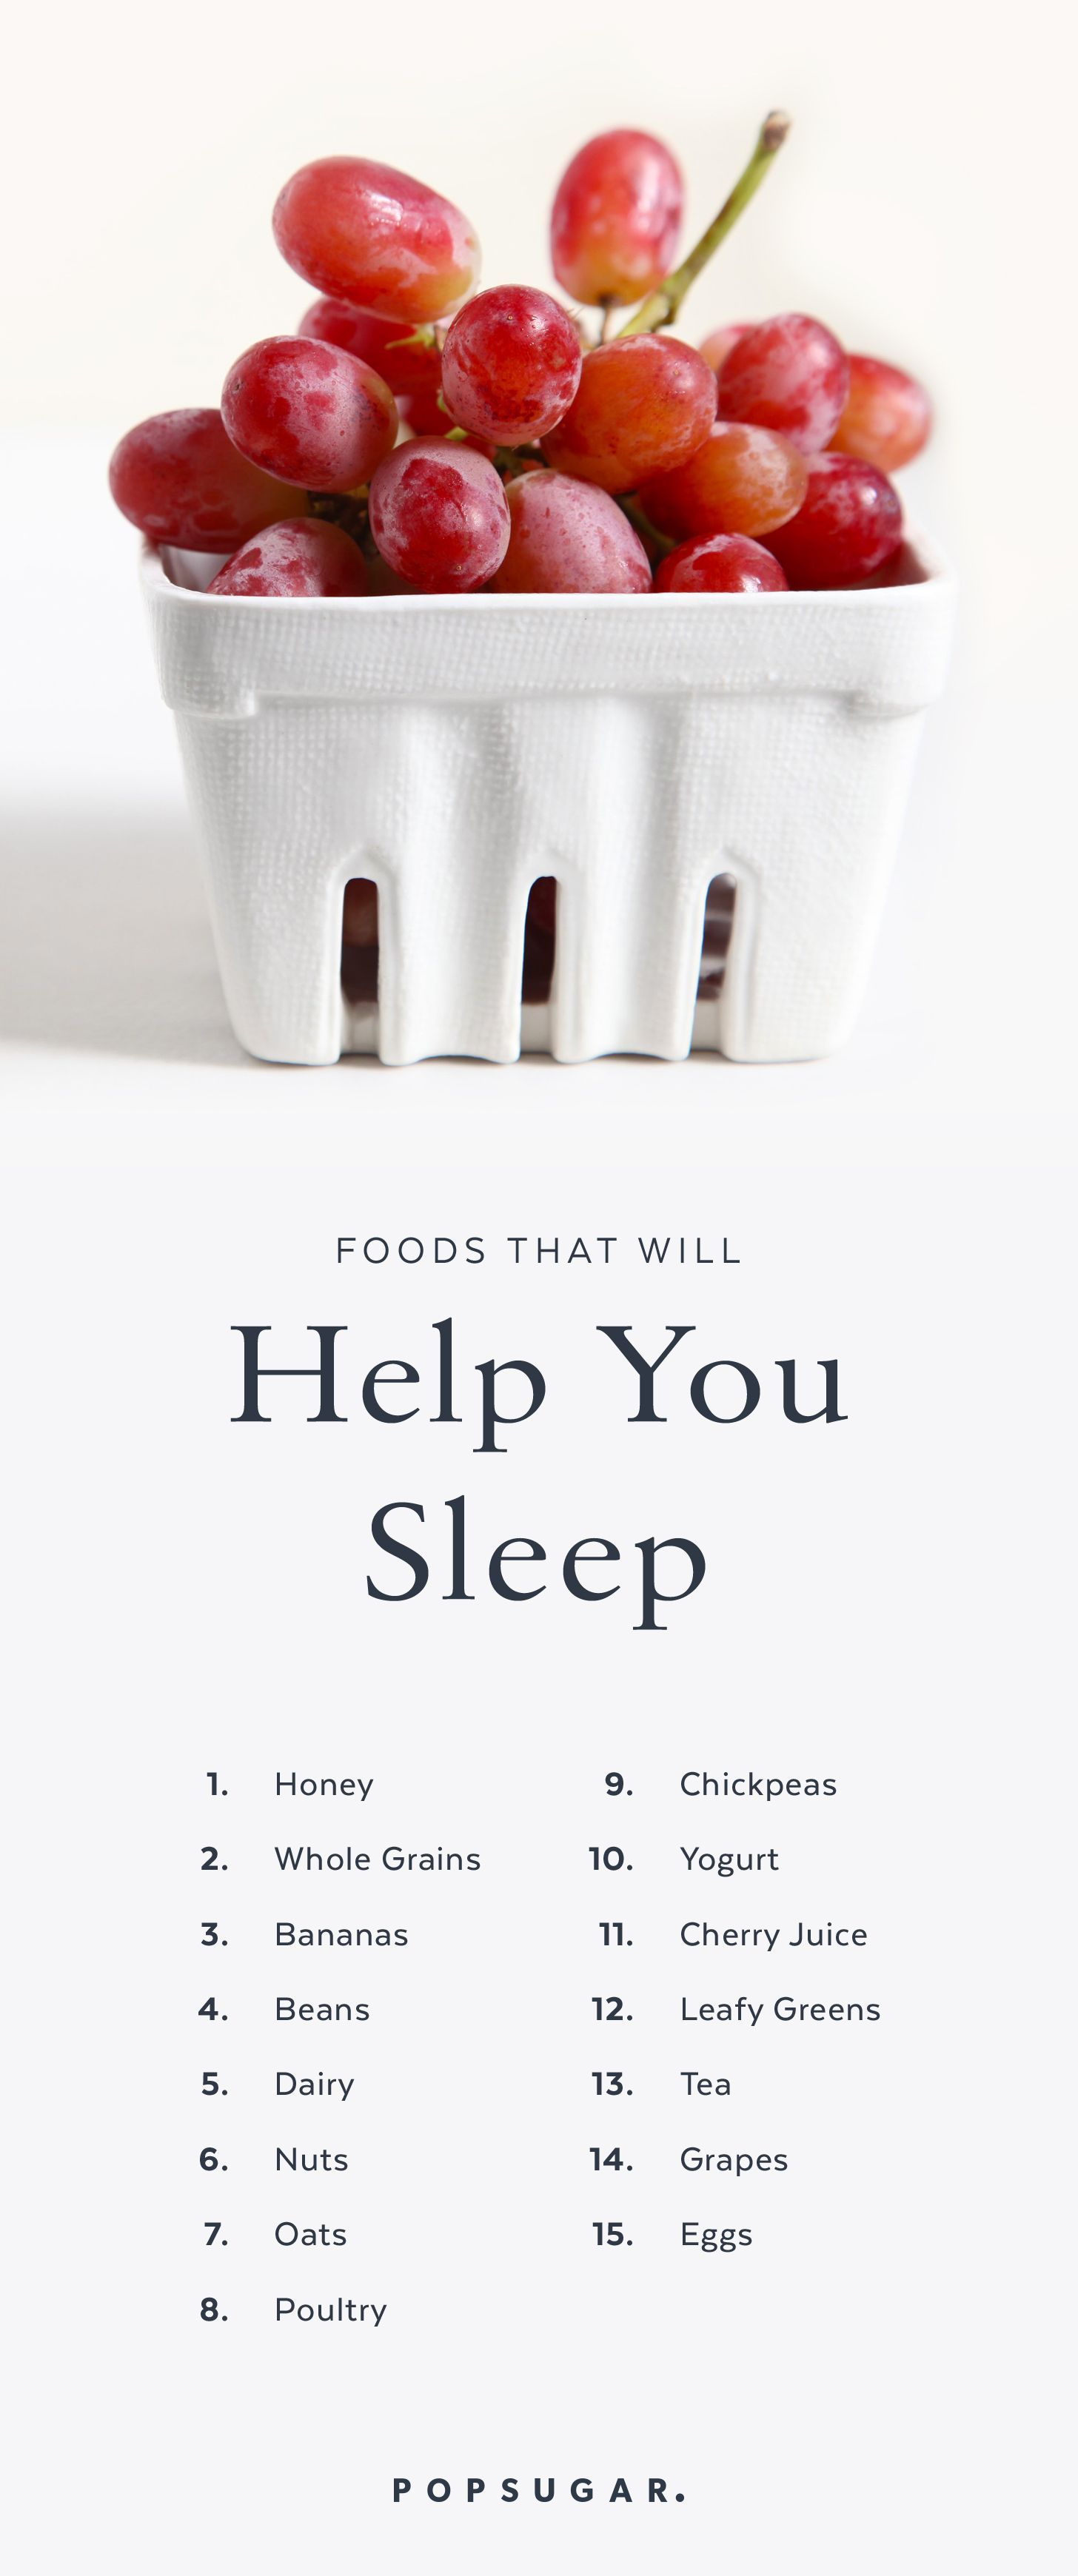 If youre a restless sleeper, try eating any of these foods a few hours before